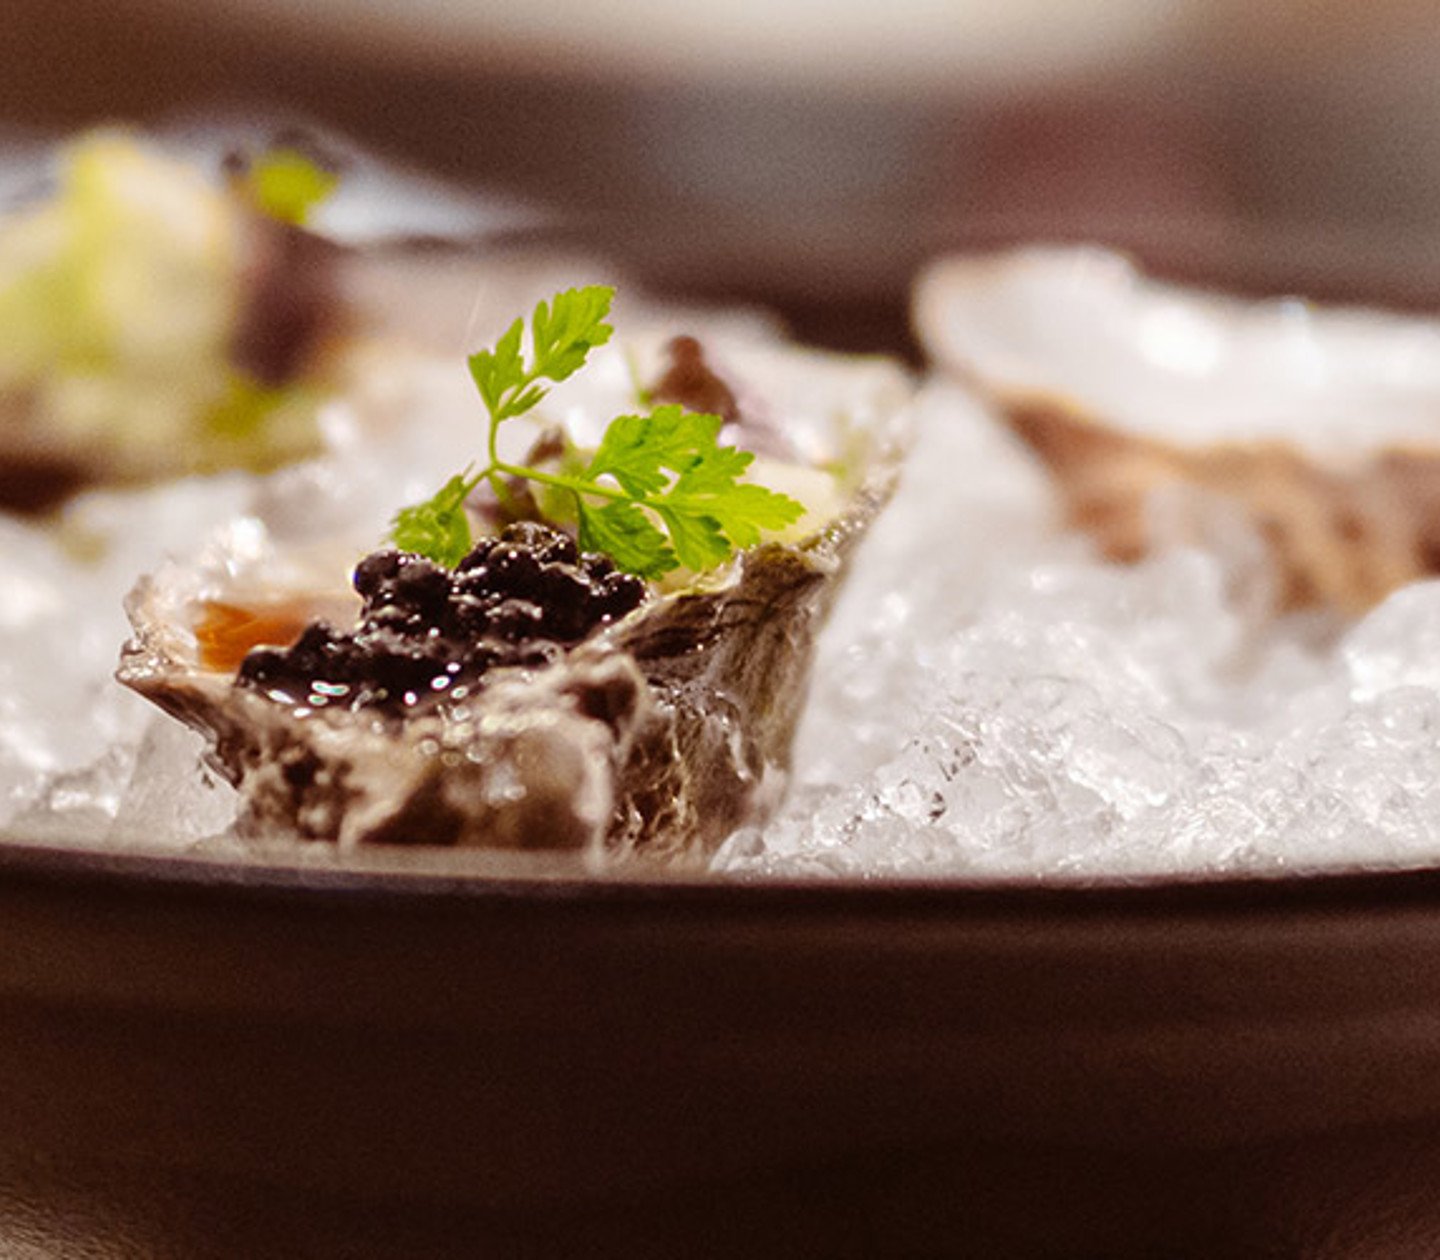 Oysters served on a dish with crushed ice